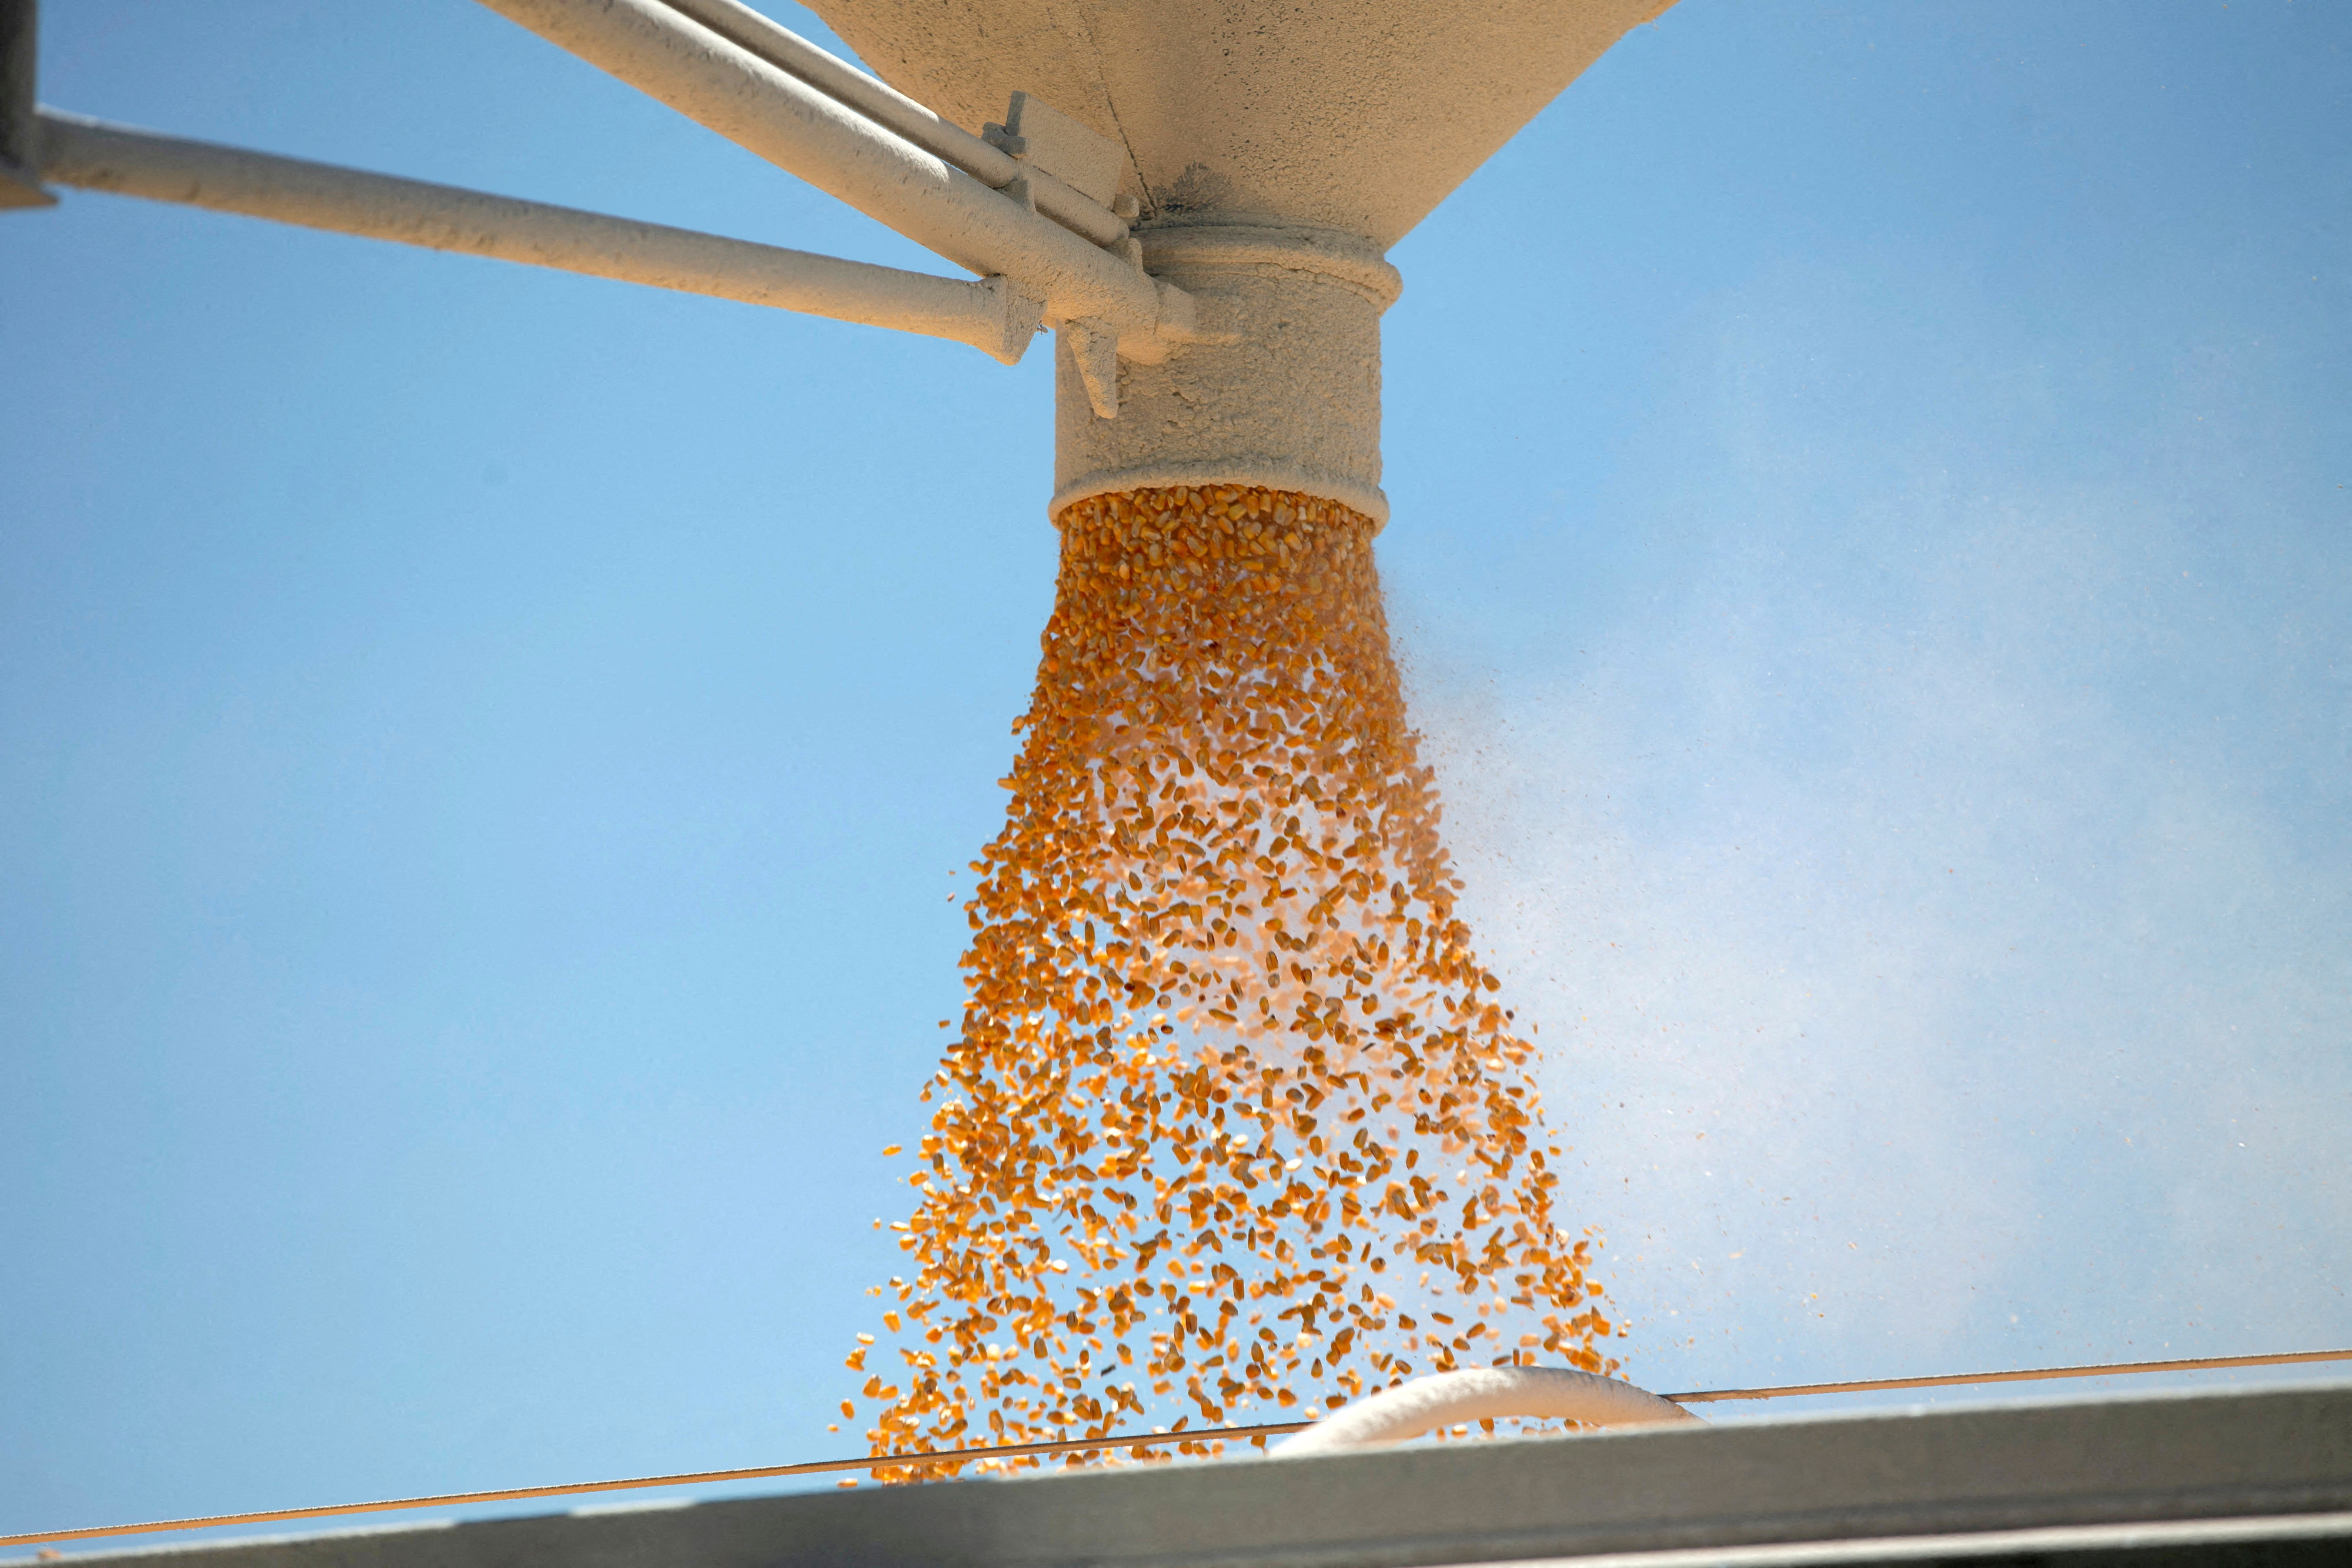 Corn is loaded onto a truck as a silo is emptied at a farm in Tiskilwa, Illinois